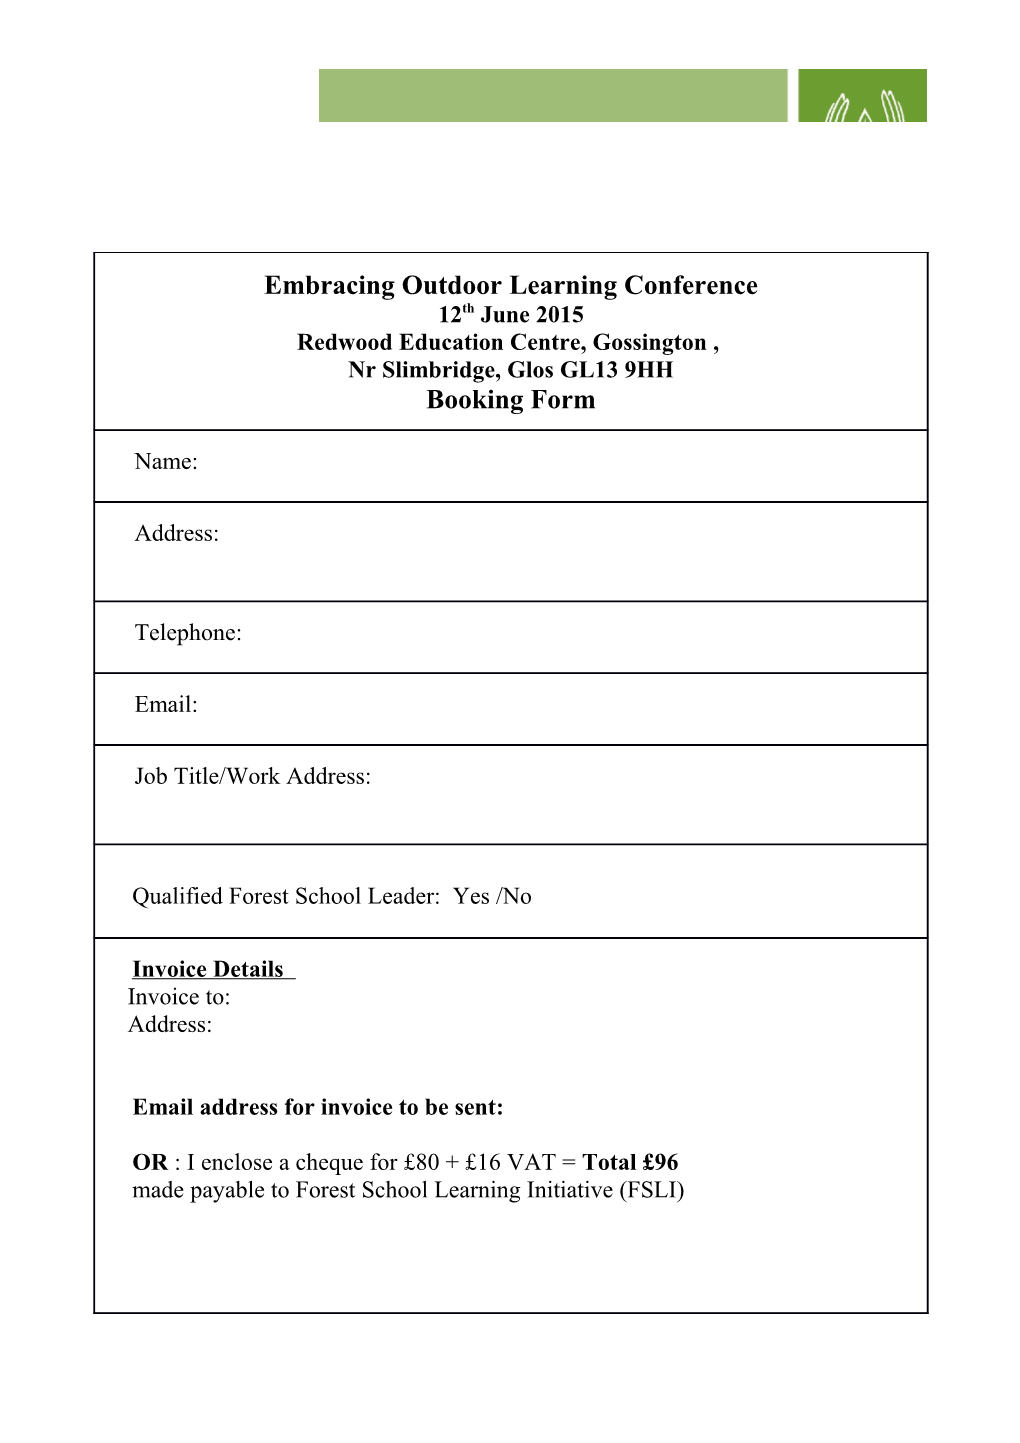 Embracing Outdoor Learning Conference